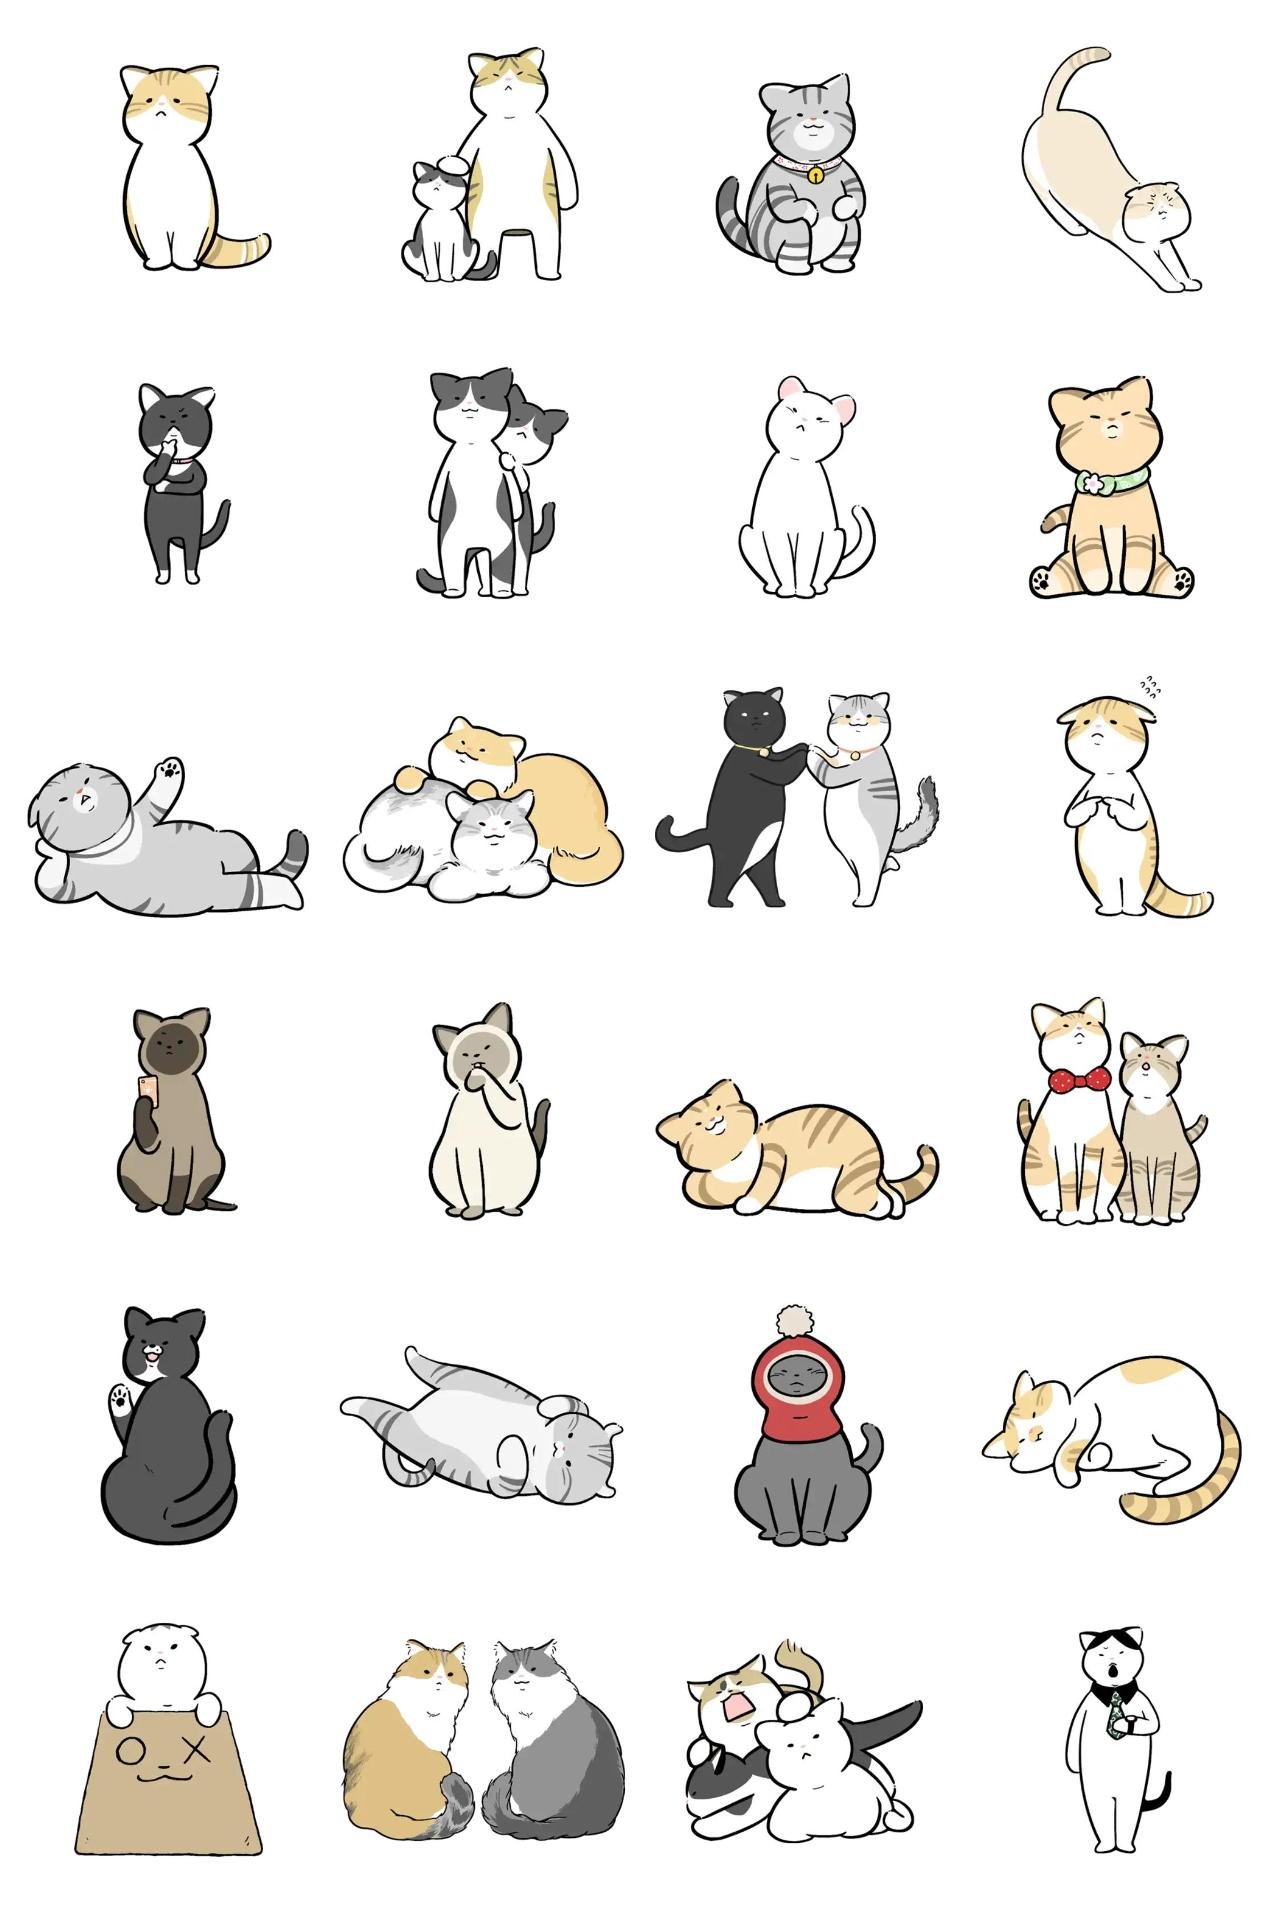 CATS Animals,People sticker pack for Whatsapp, Telegram, Signal, and others chatting and message apps